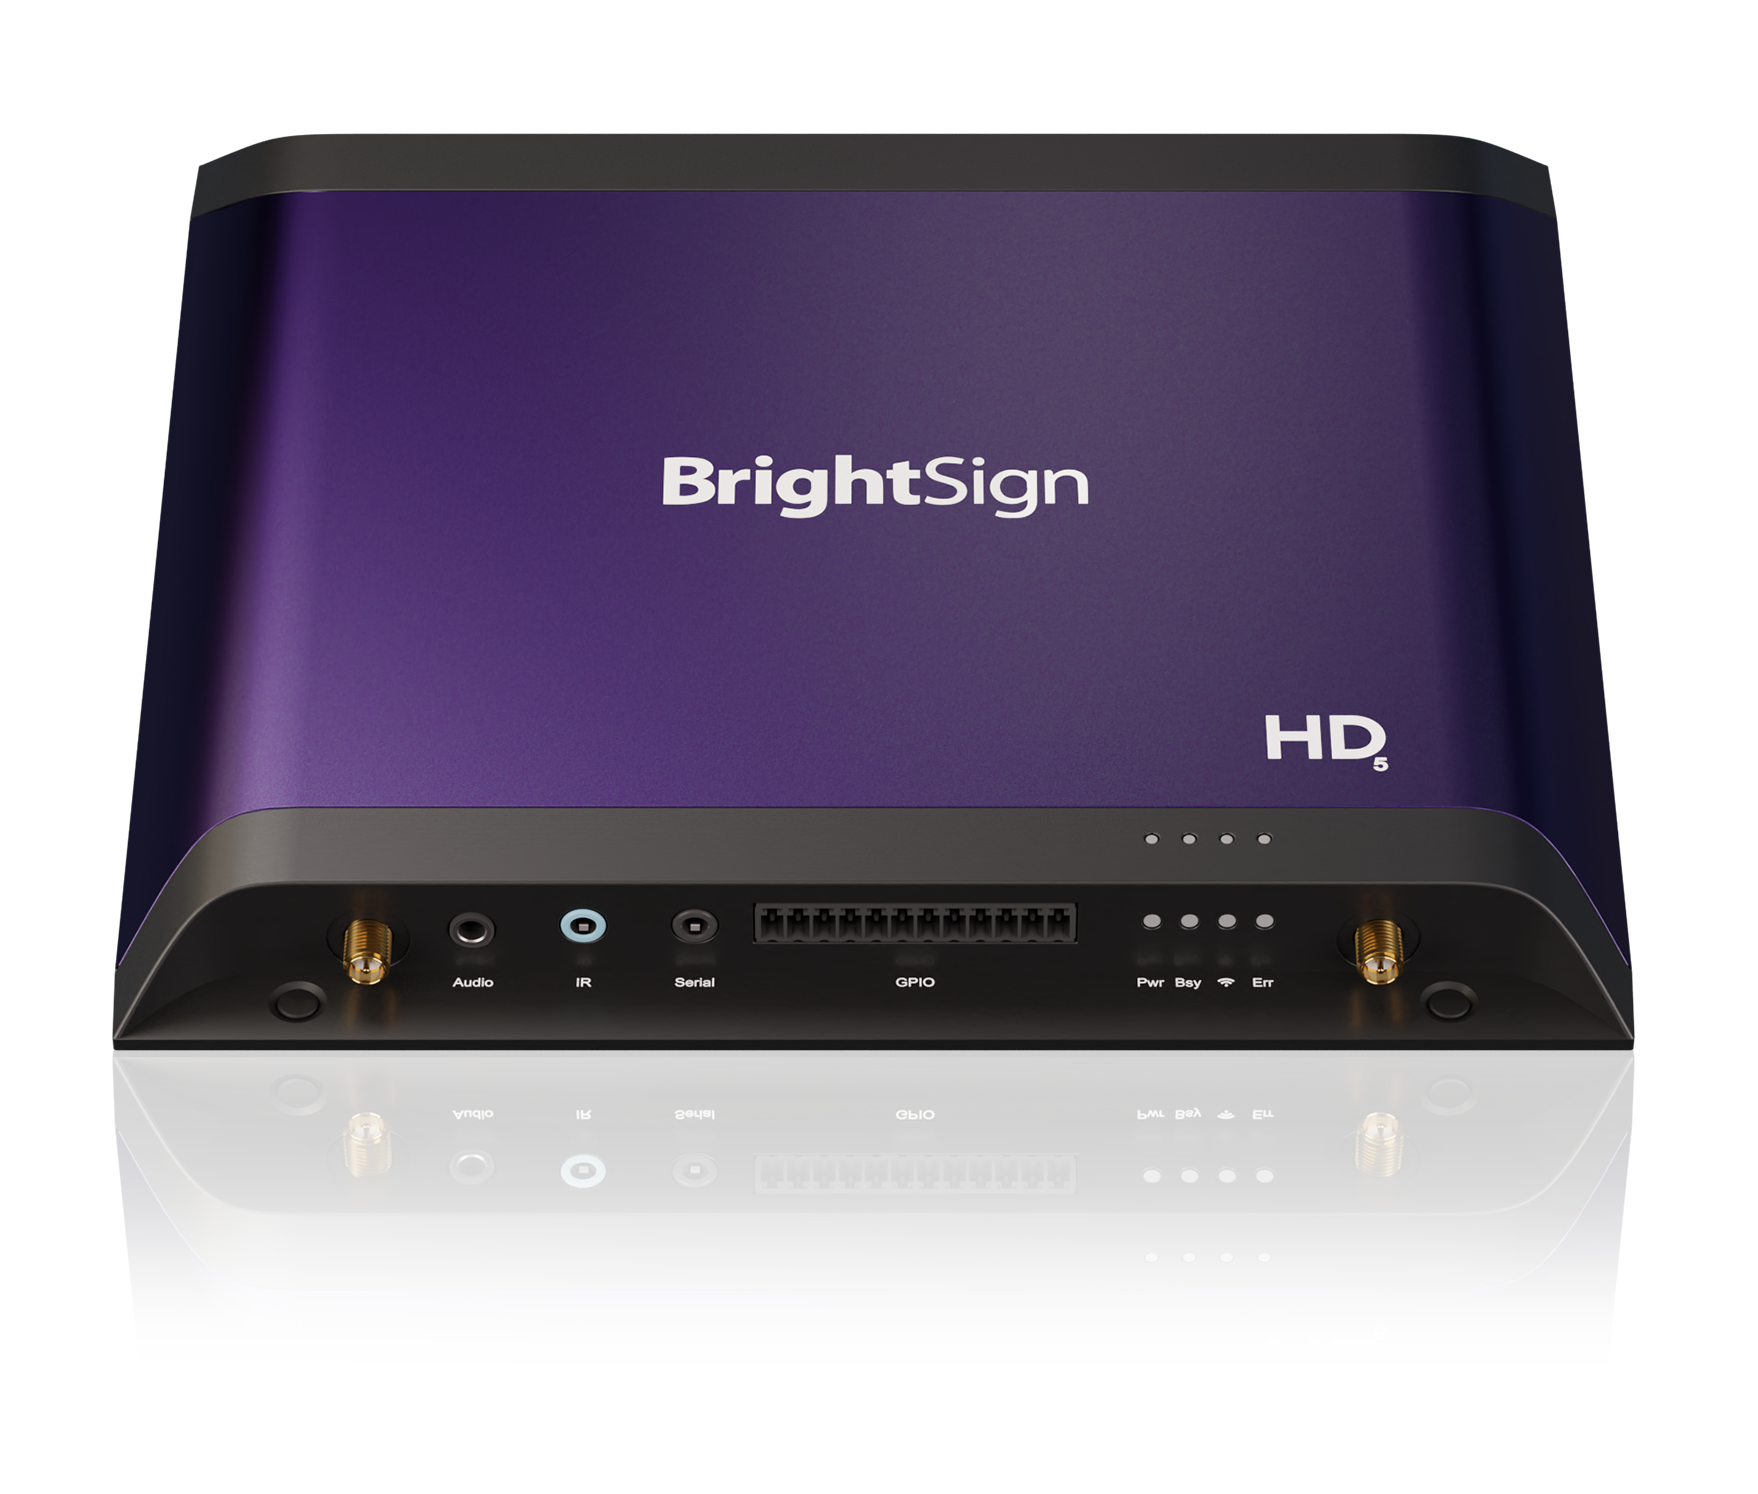 Product image of BrightSign HD5 digital signage players from BrightSign Series 5